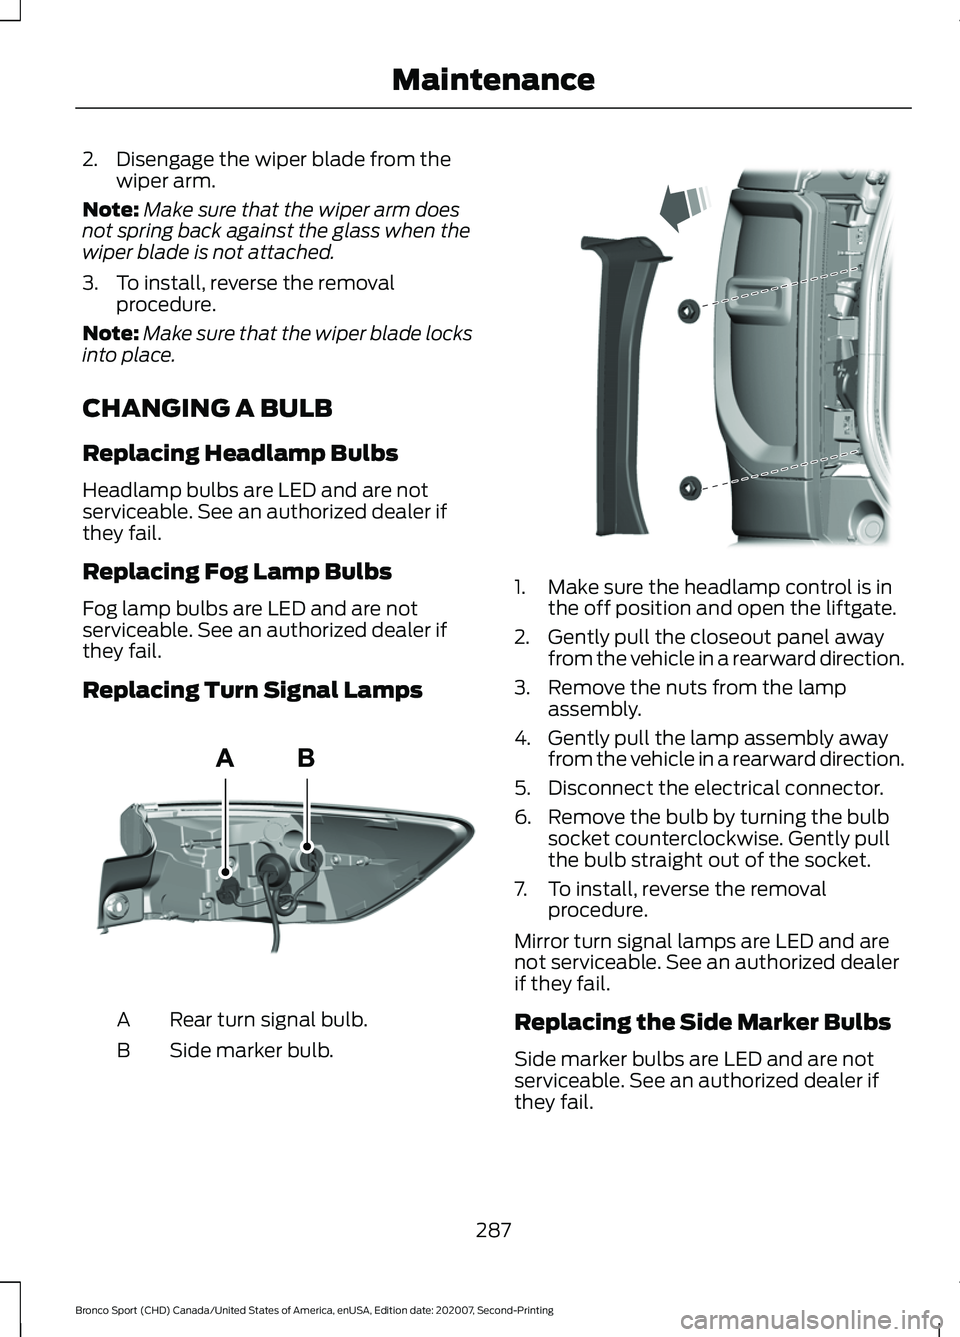 FORD BRONCO SPORT 2021  Owners Manual 2. Disengage the wiper blade from the
wiper arm.
Note: Make sure that the wiper arm does
not spring back against the glass when the
wiper blade is not attached.
3. To install, reverse the removal proc